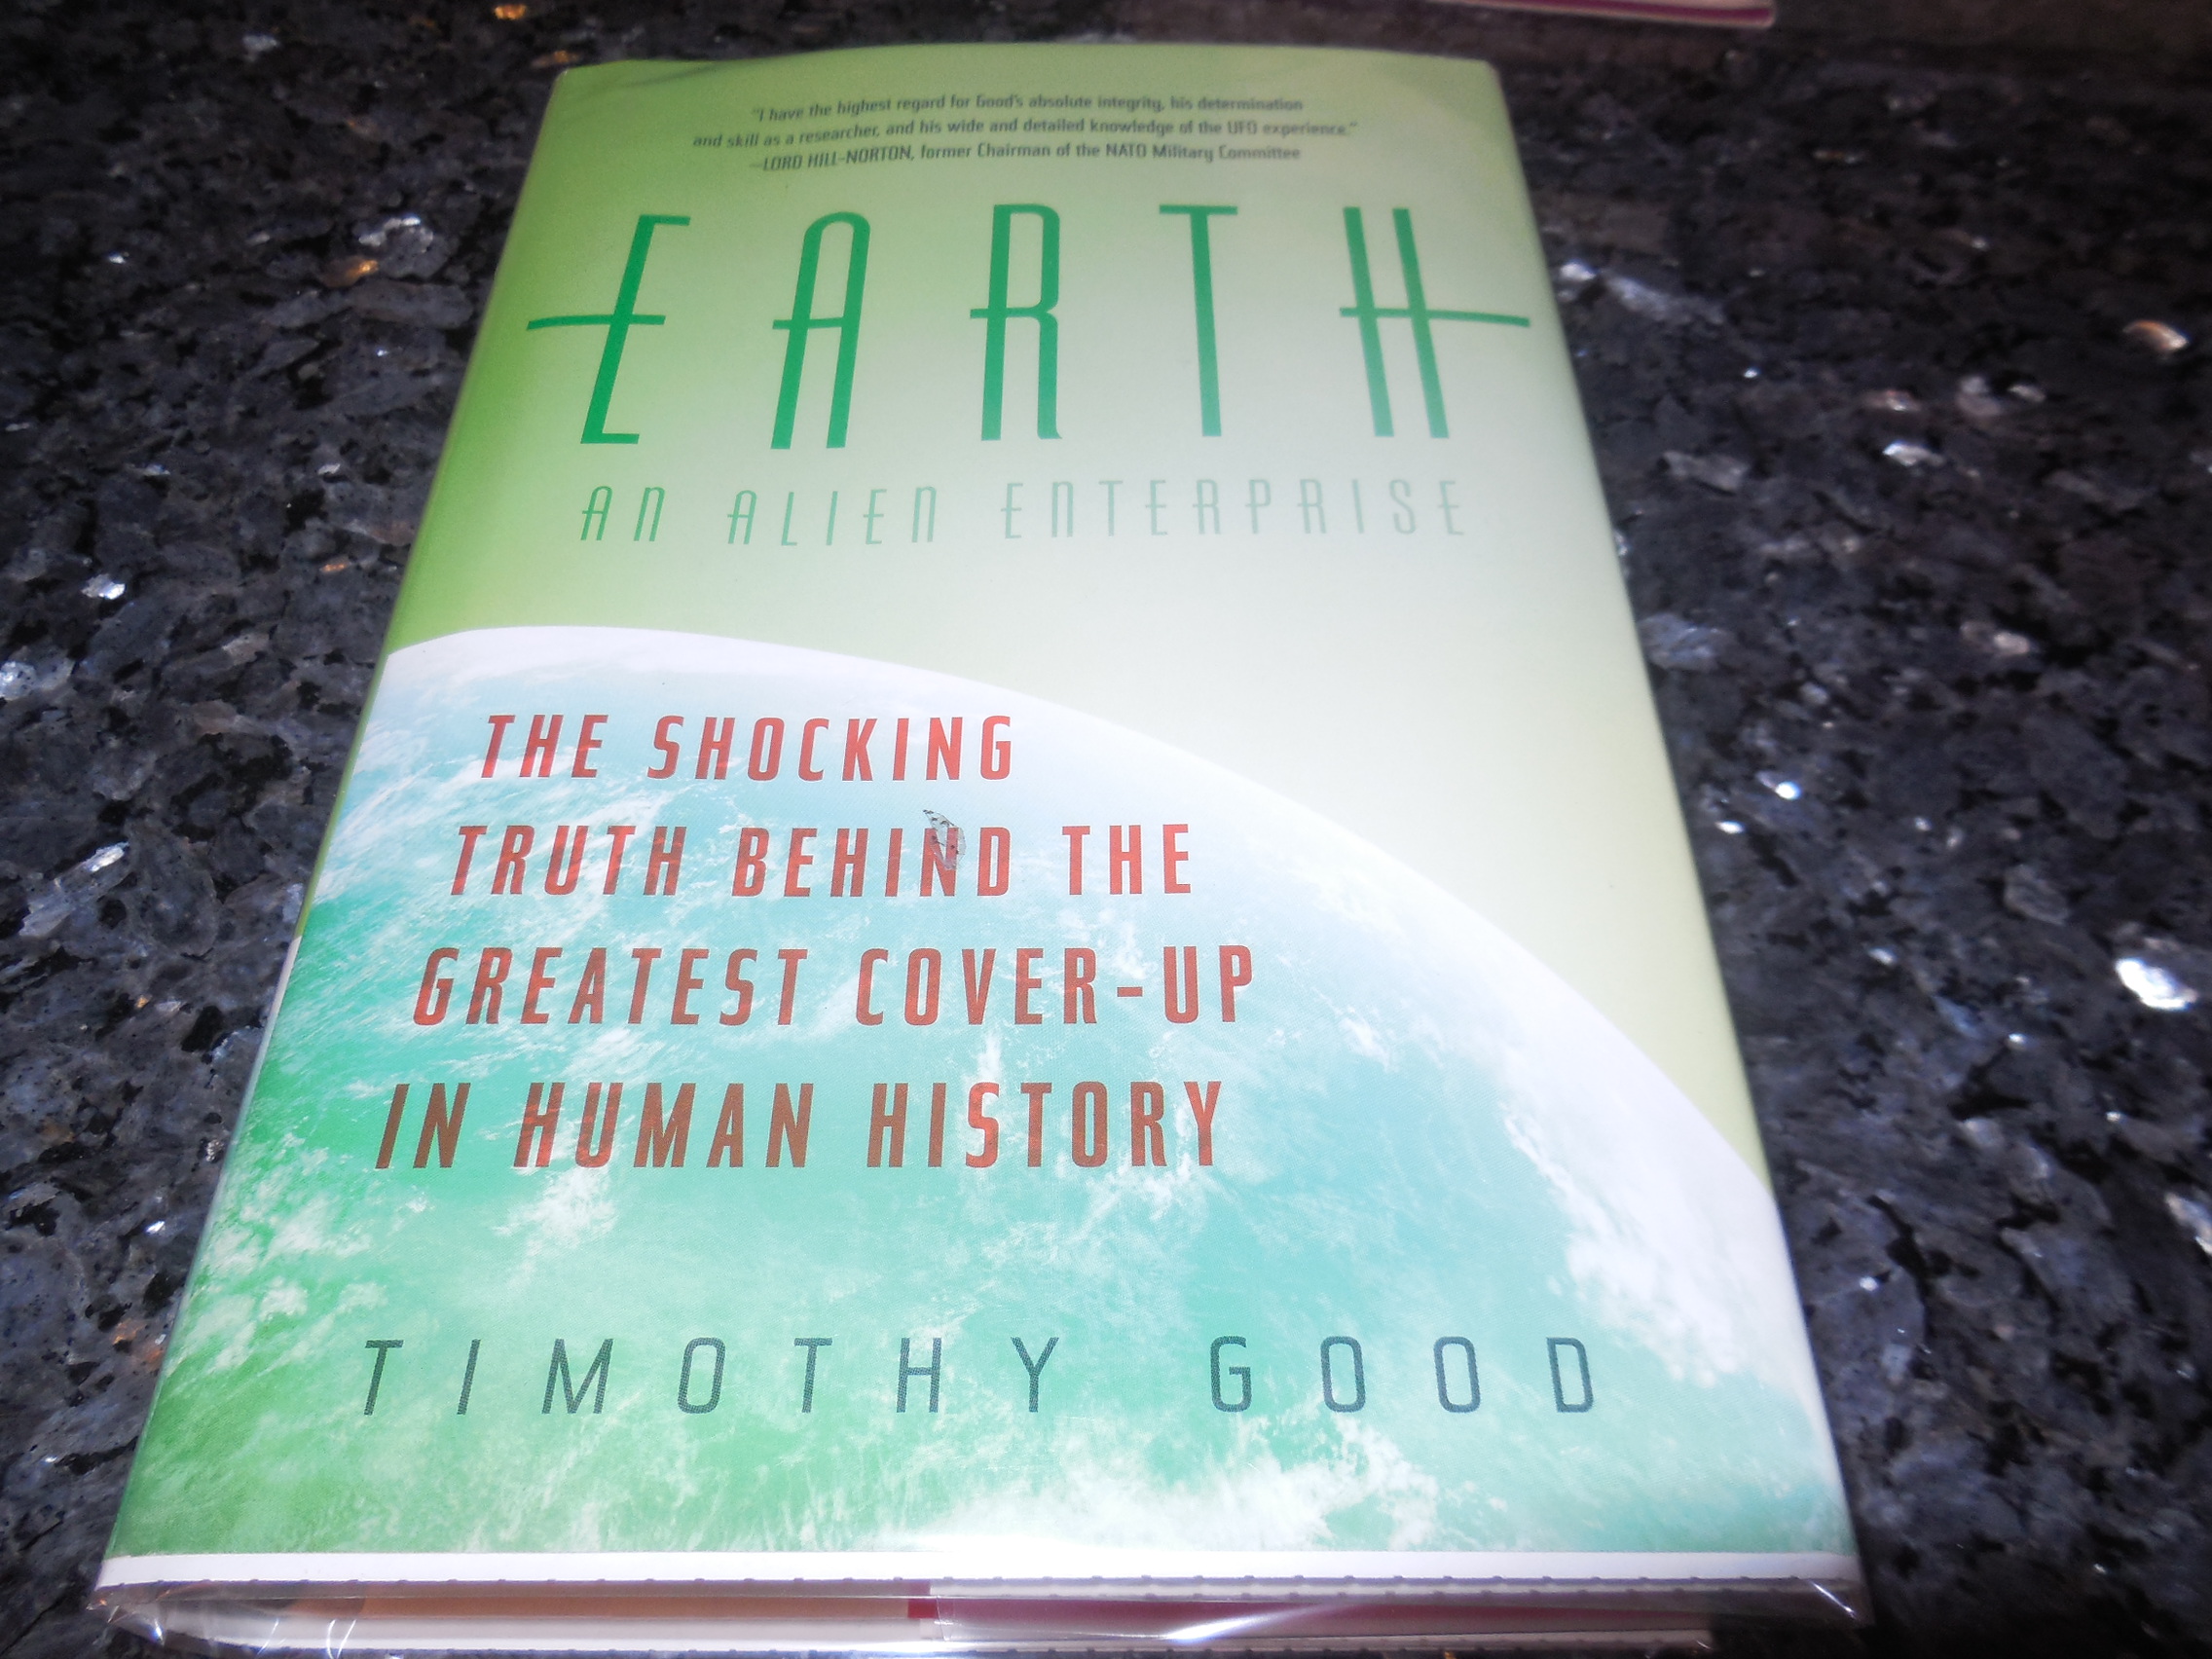 Image for Earth: An Alien Enterprise: The Shocking Truth Behind the Greatest Cover-Up in Human History